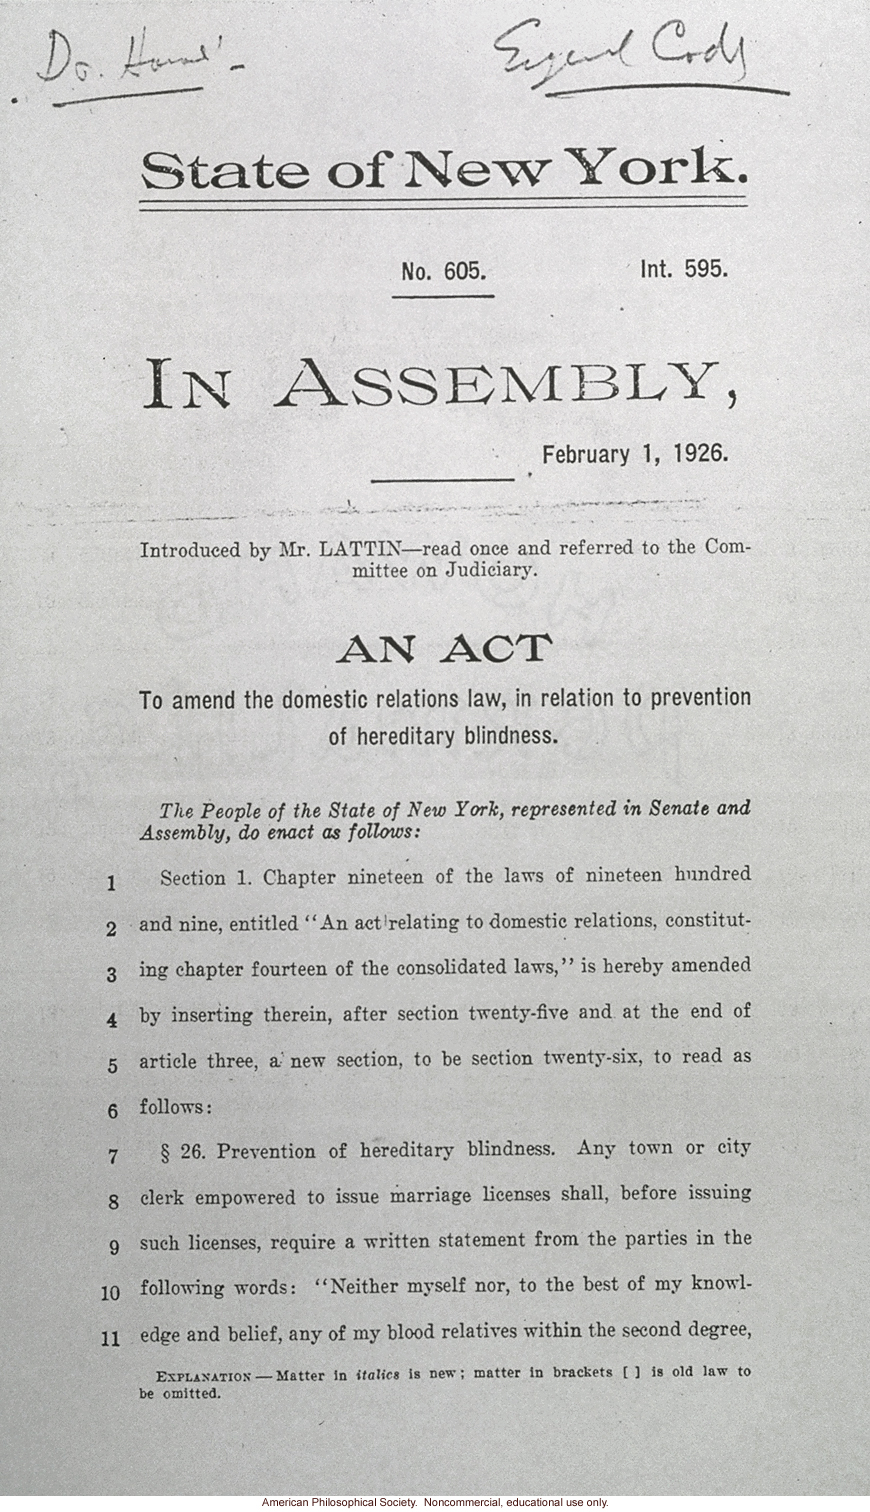 &quote;An act to amend the domestic relations law, in relation to prevention of hereditary blindness&quote;, New York State Senate